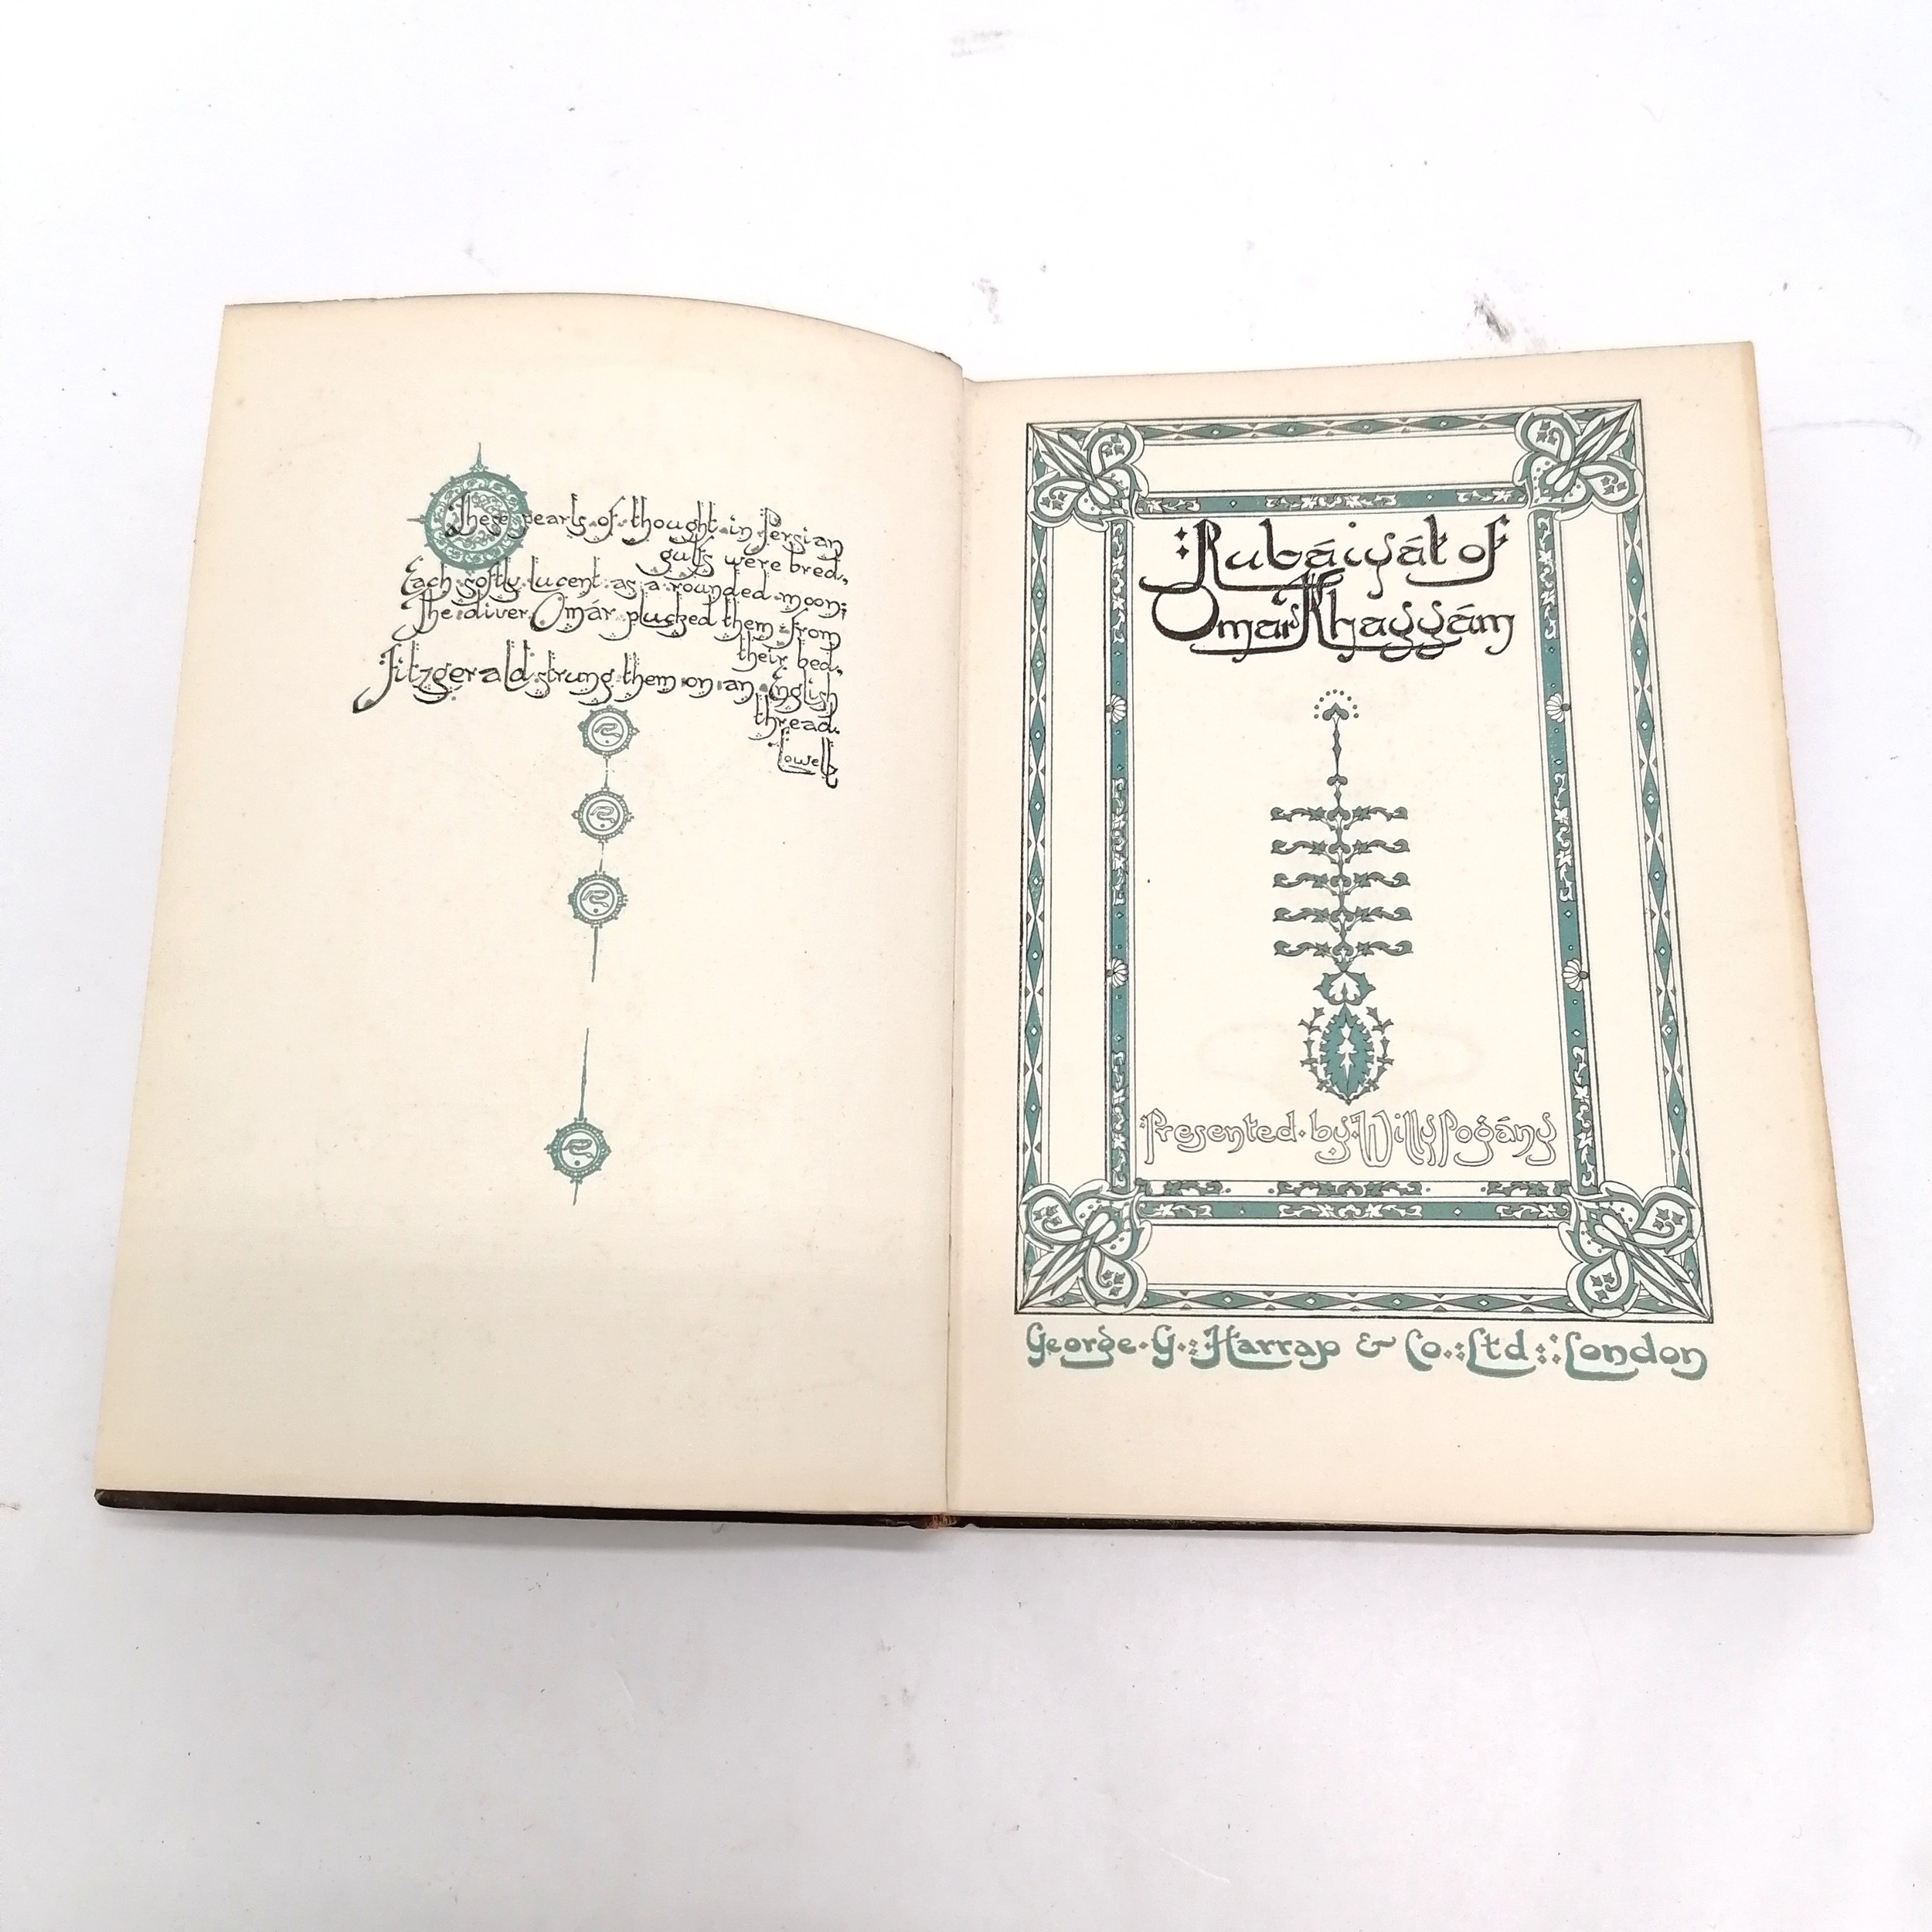 (1909+) Rubaiyat of Omar Khayyam (George Harrap) book with illustrations by William 'Willy' Andrew - Image 6 of 8